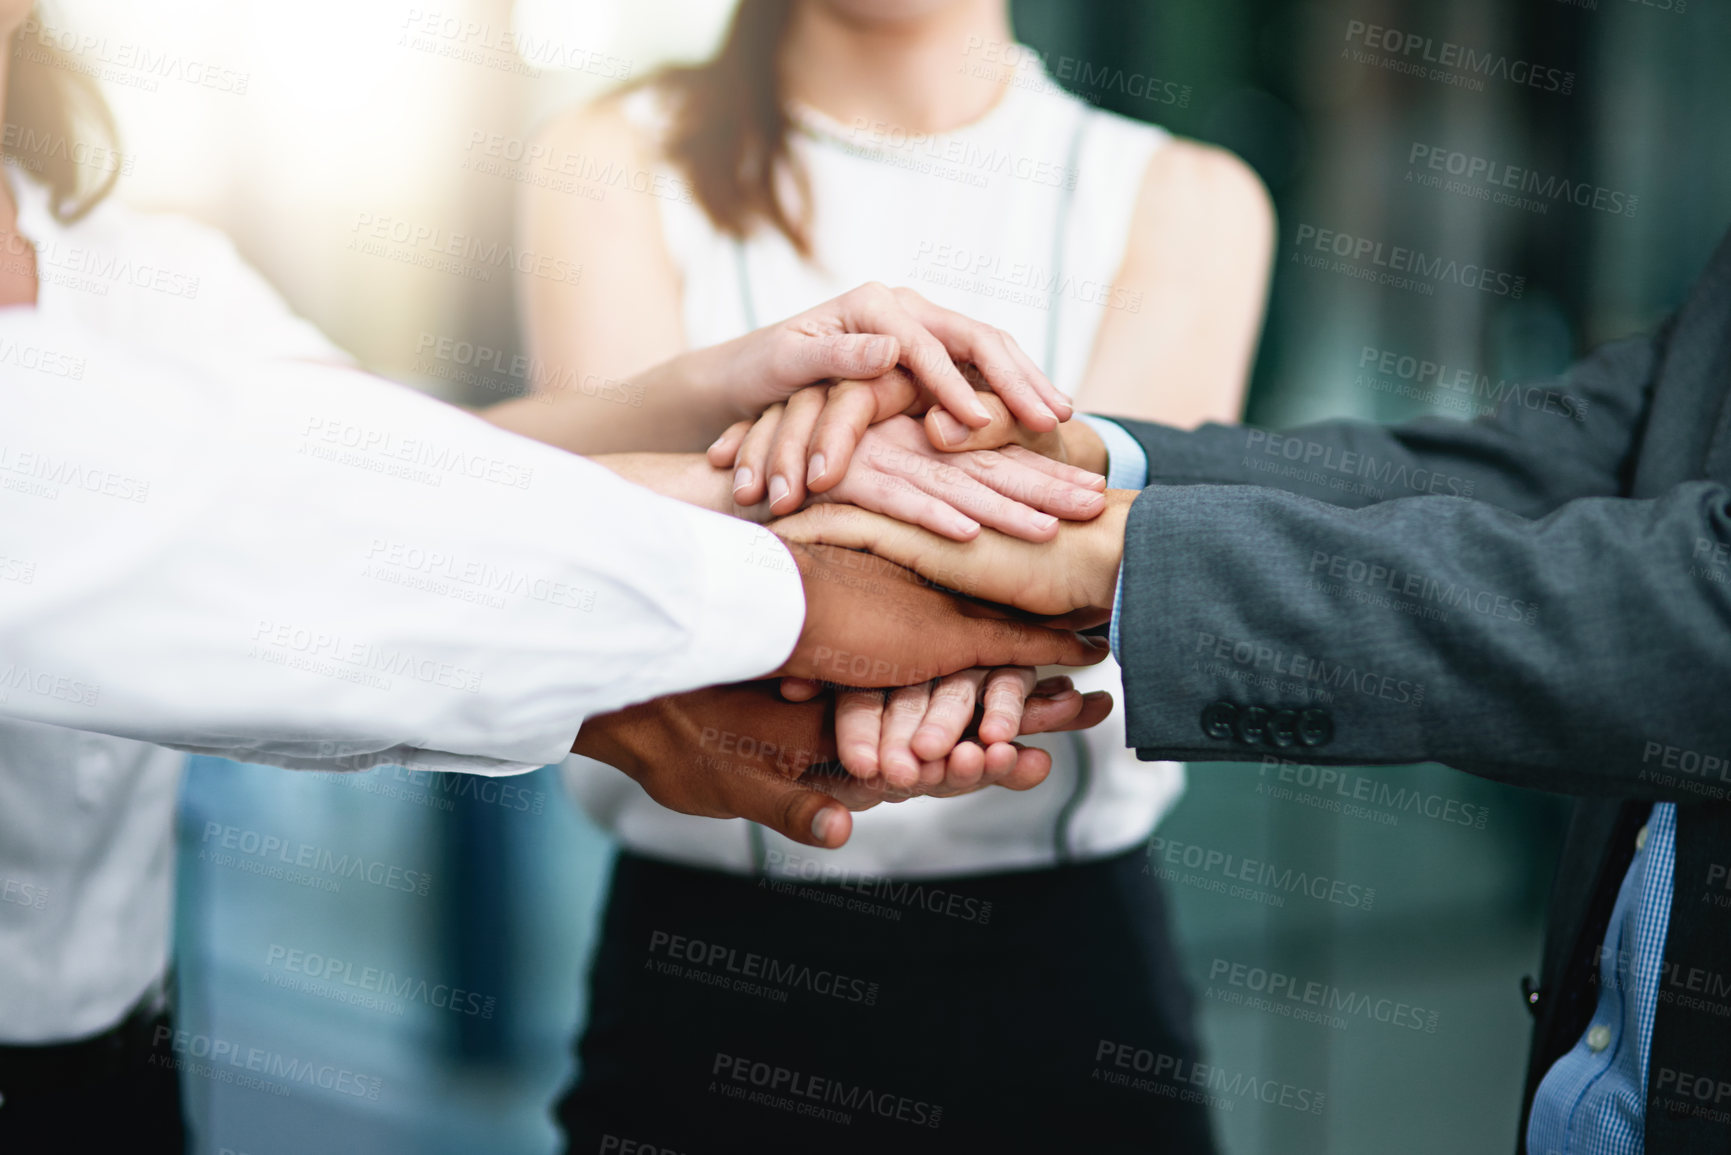 Buy stock photo Closeup shot of a group of businesspeople joining their hands together in unity